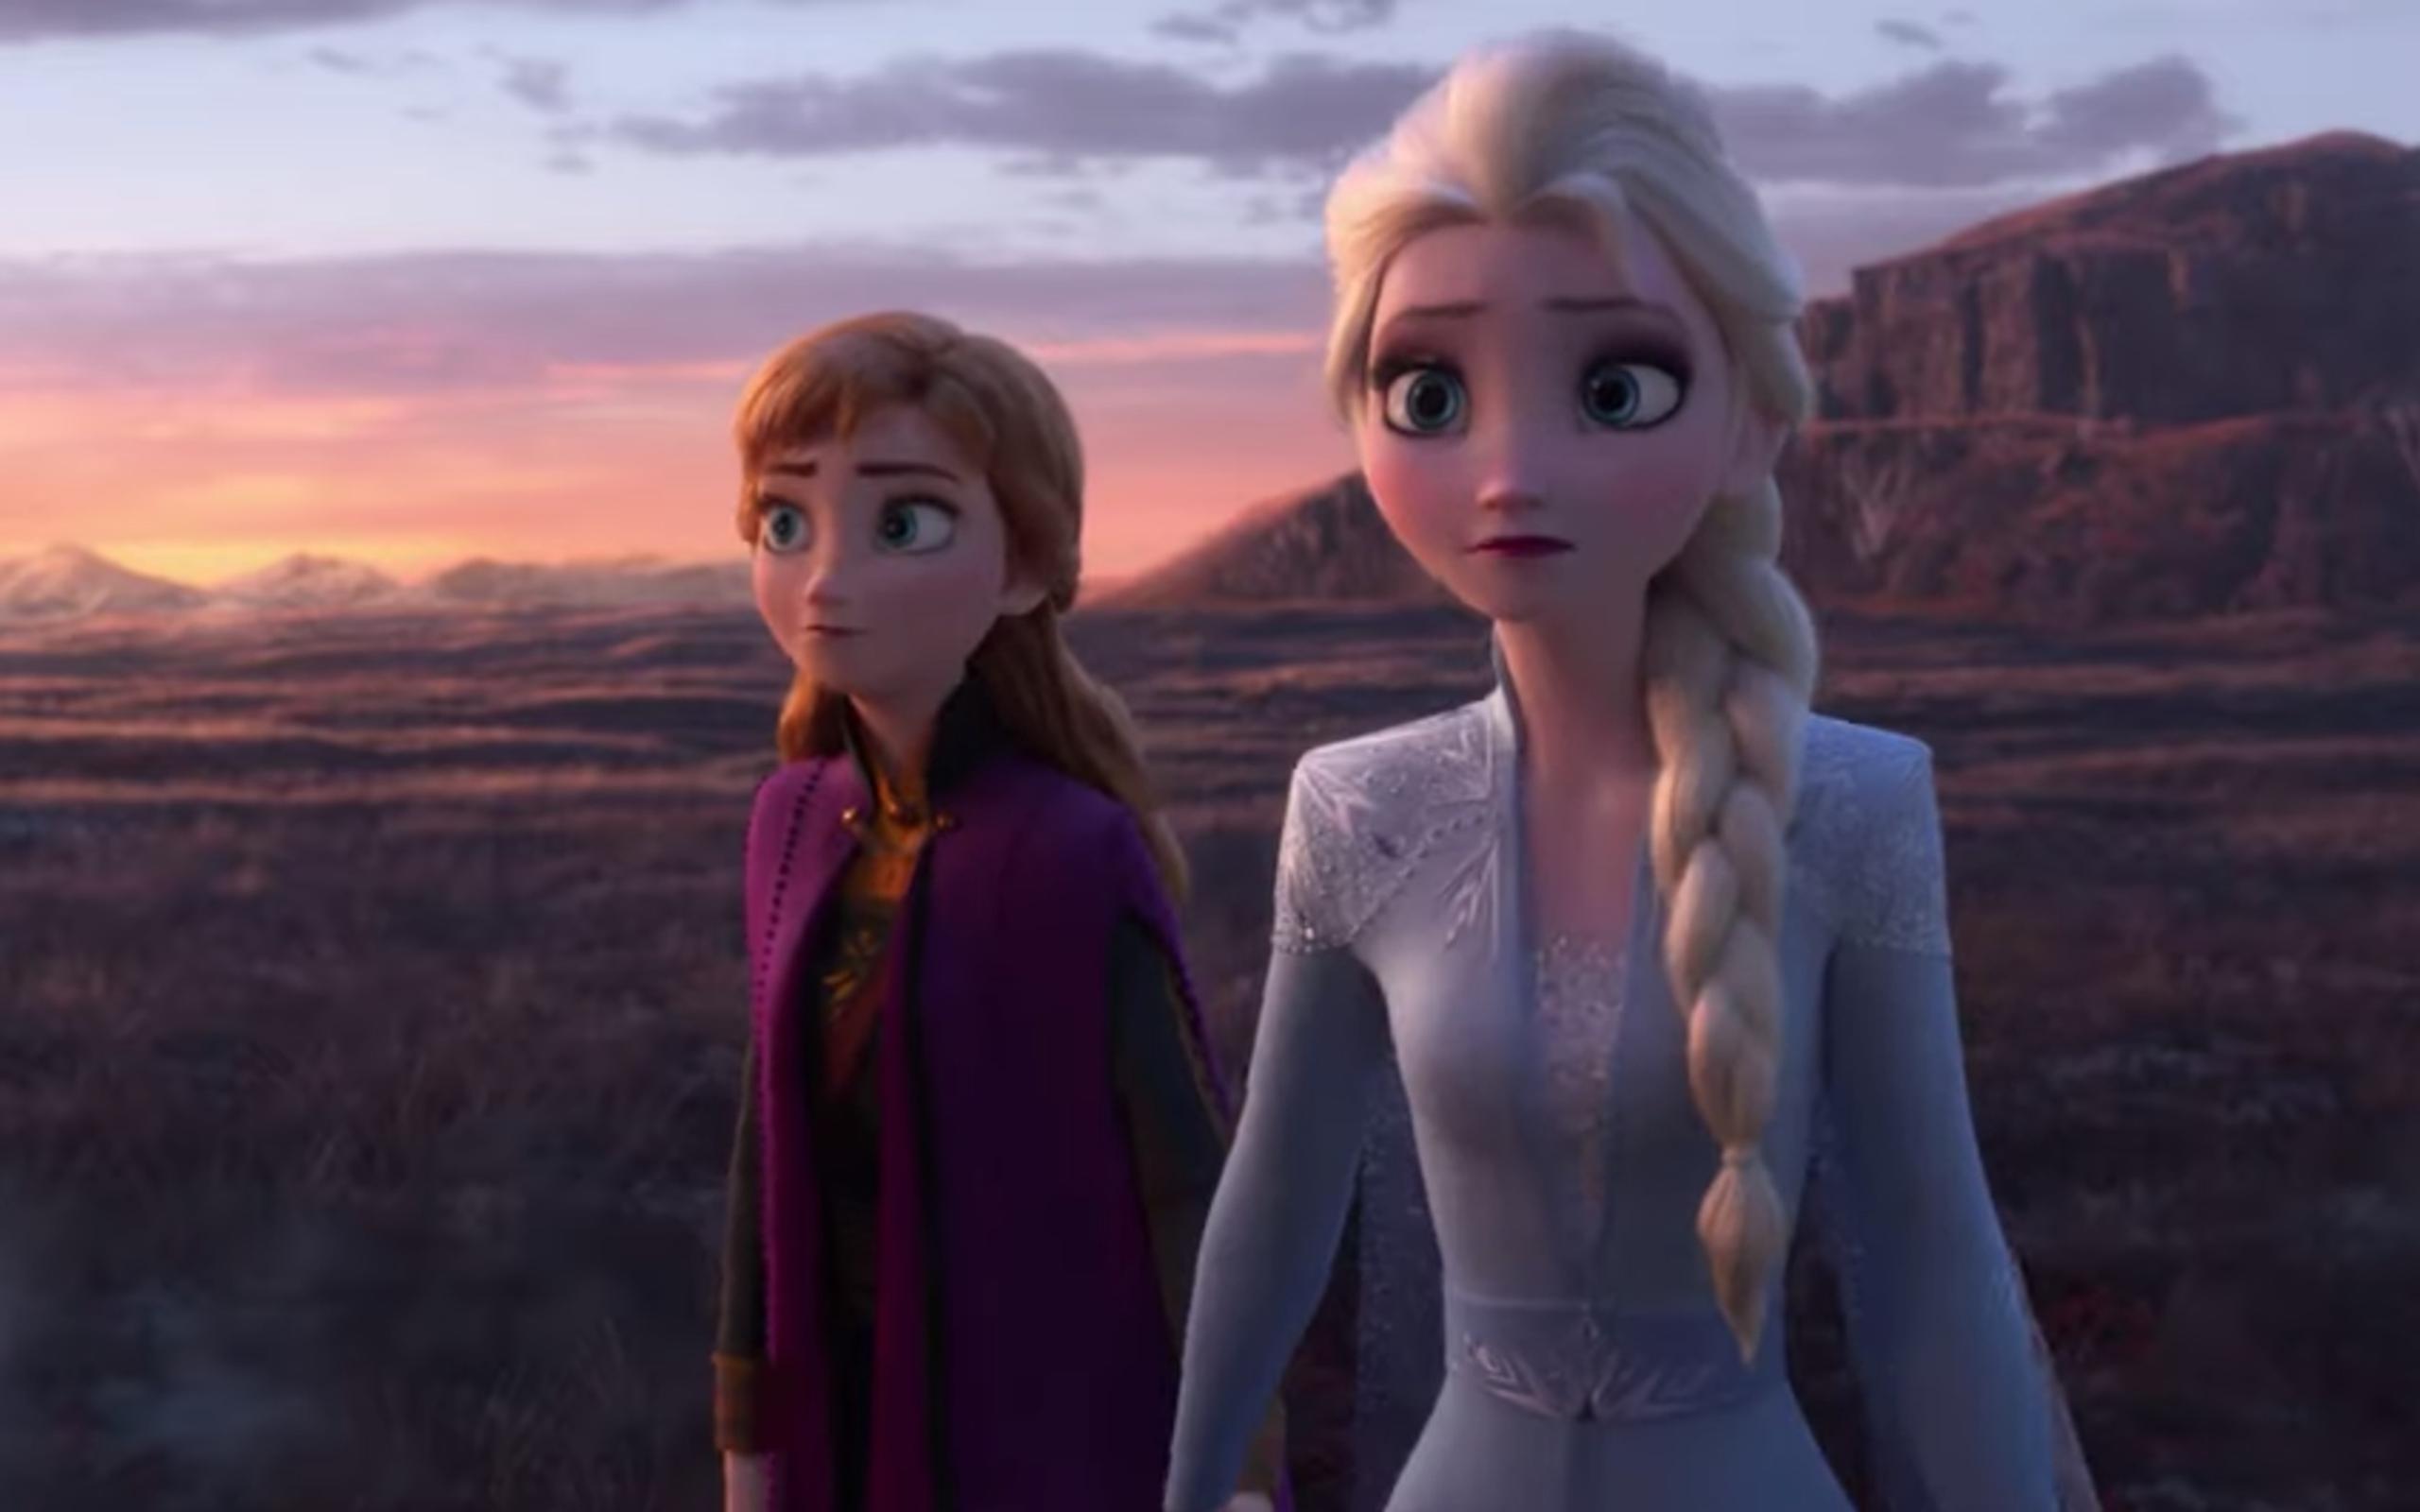 Two sisters - Ana and Elsa in Frozen 2 - Animation movie